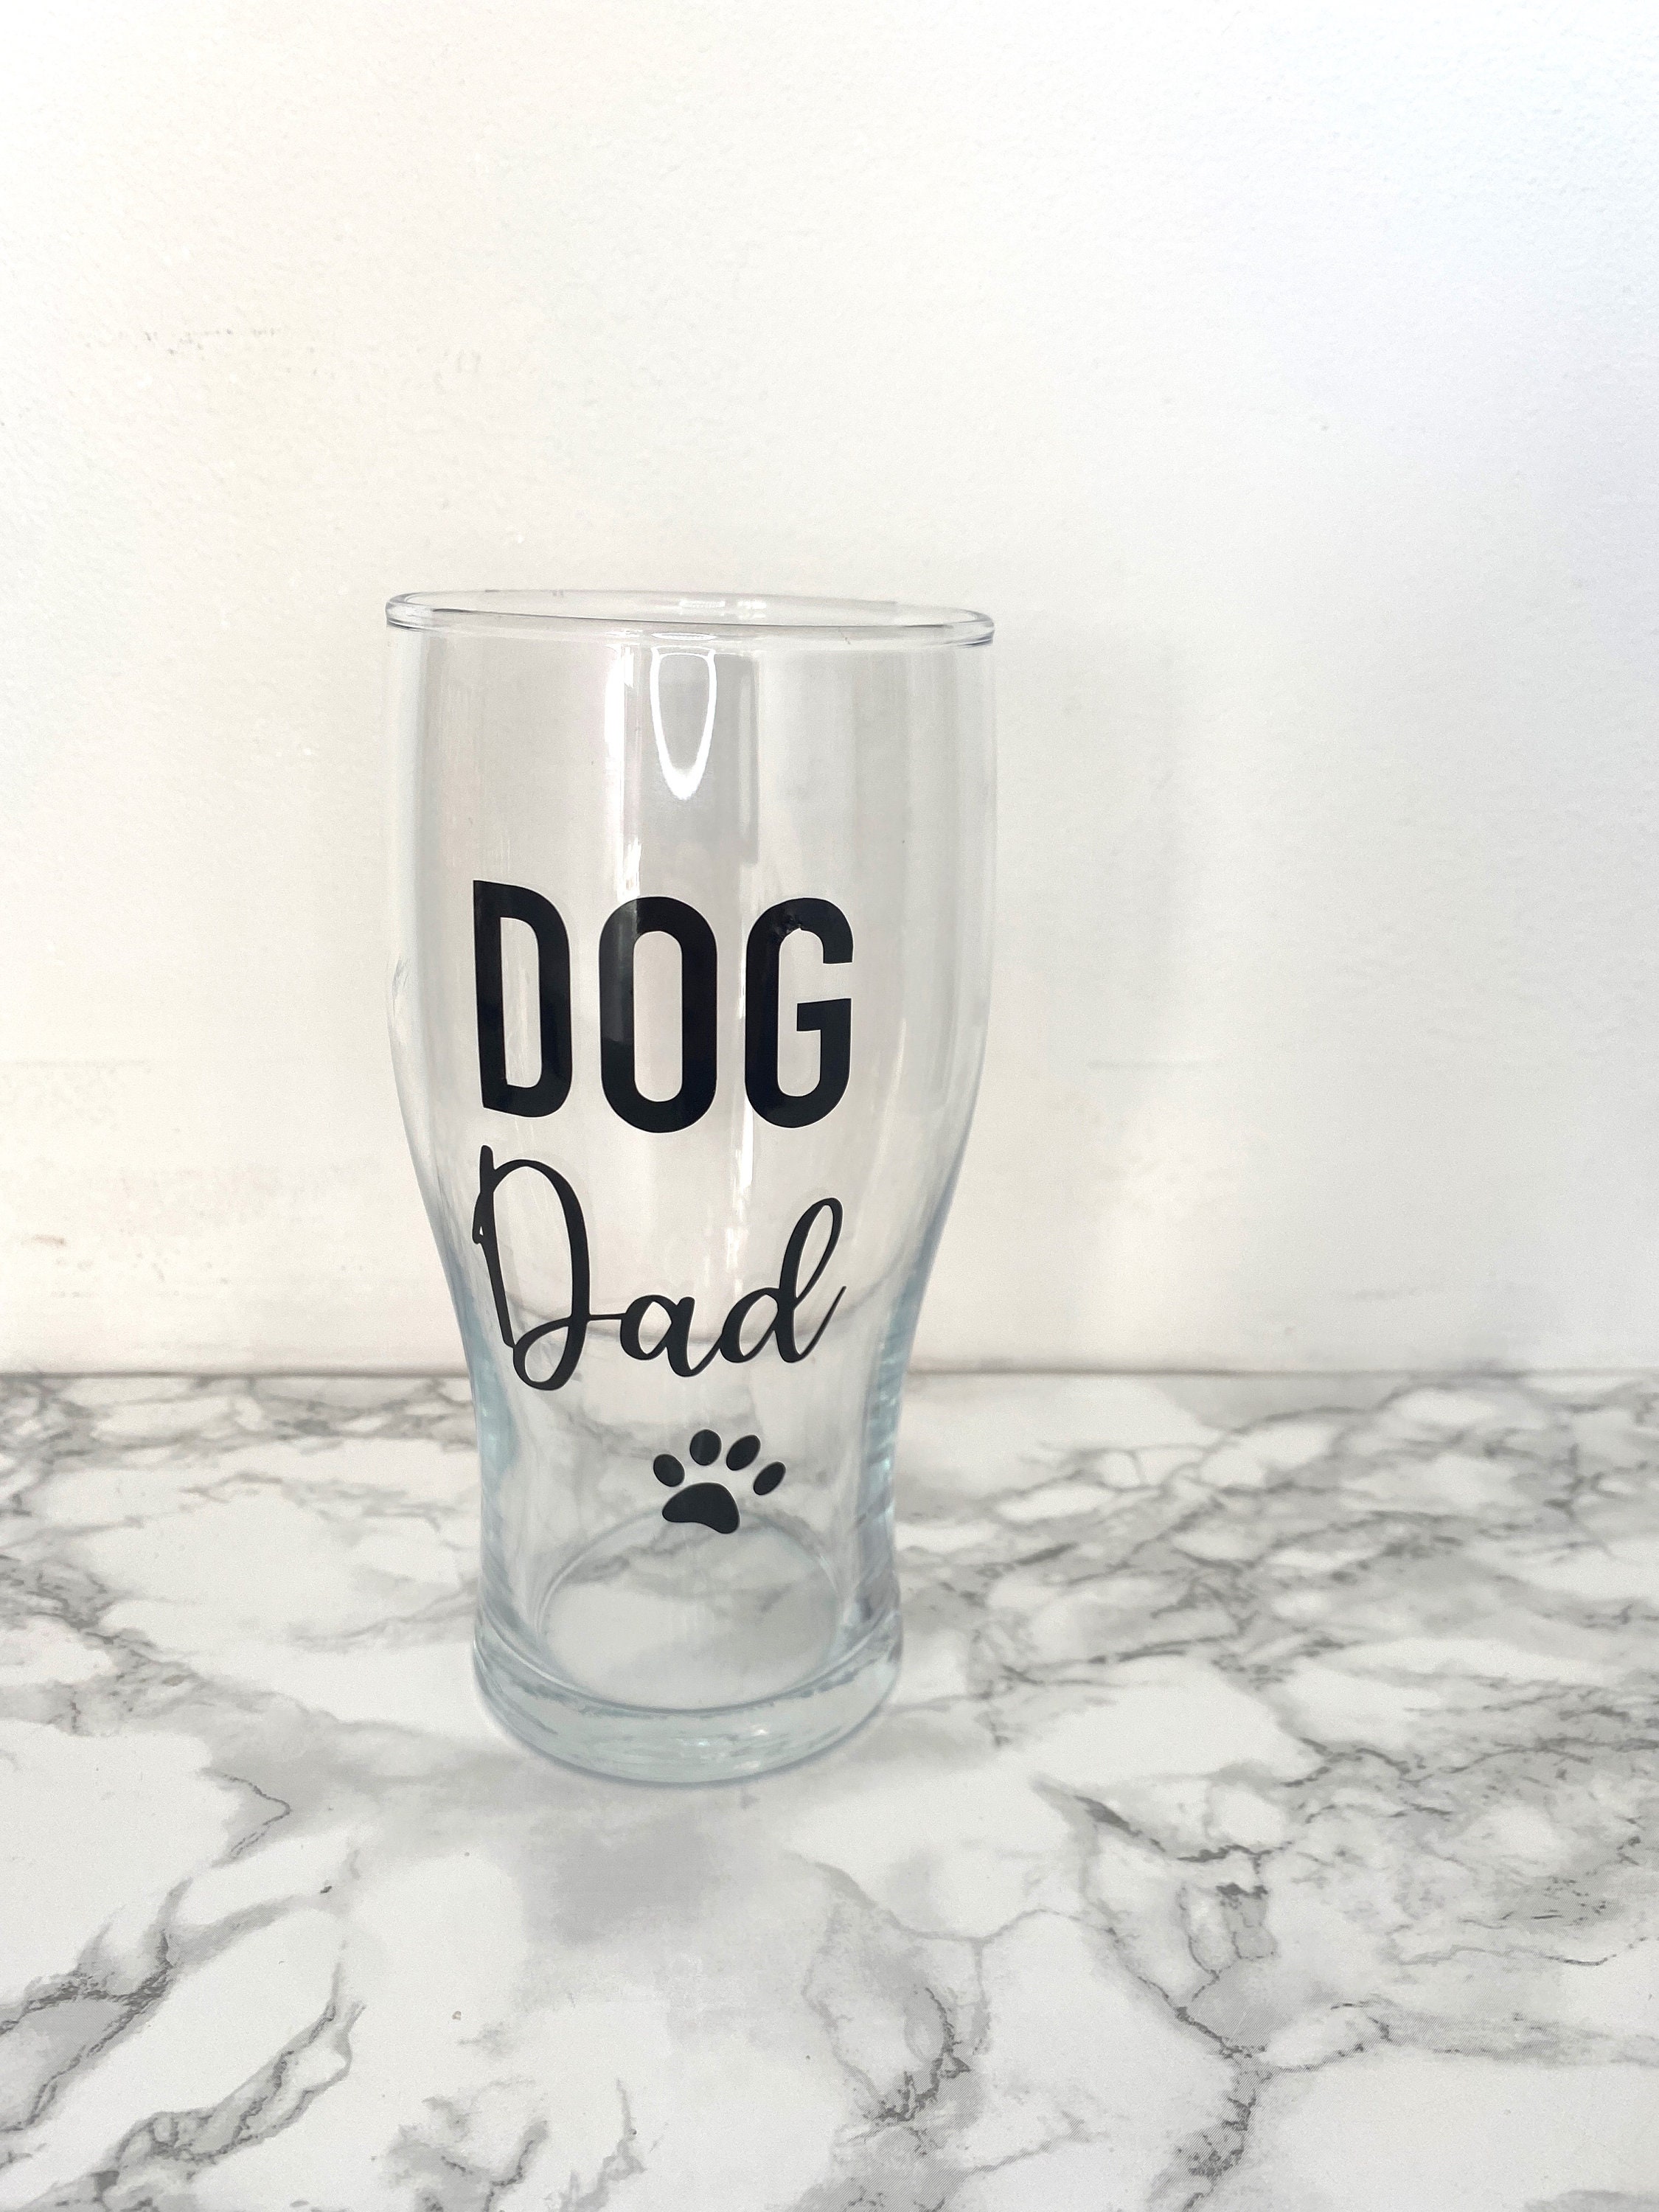 Dad Gifts for Fathers Day/Birthday from Daughter/Son Onebttl Beer Glass for Dad 15oz Pint glass/Beer mug to BEST DAD EVER-Blue 